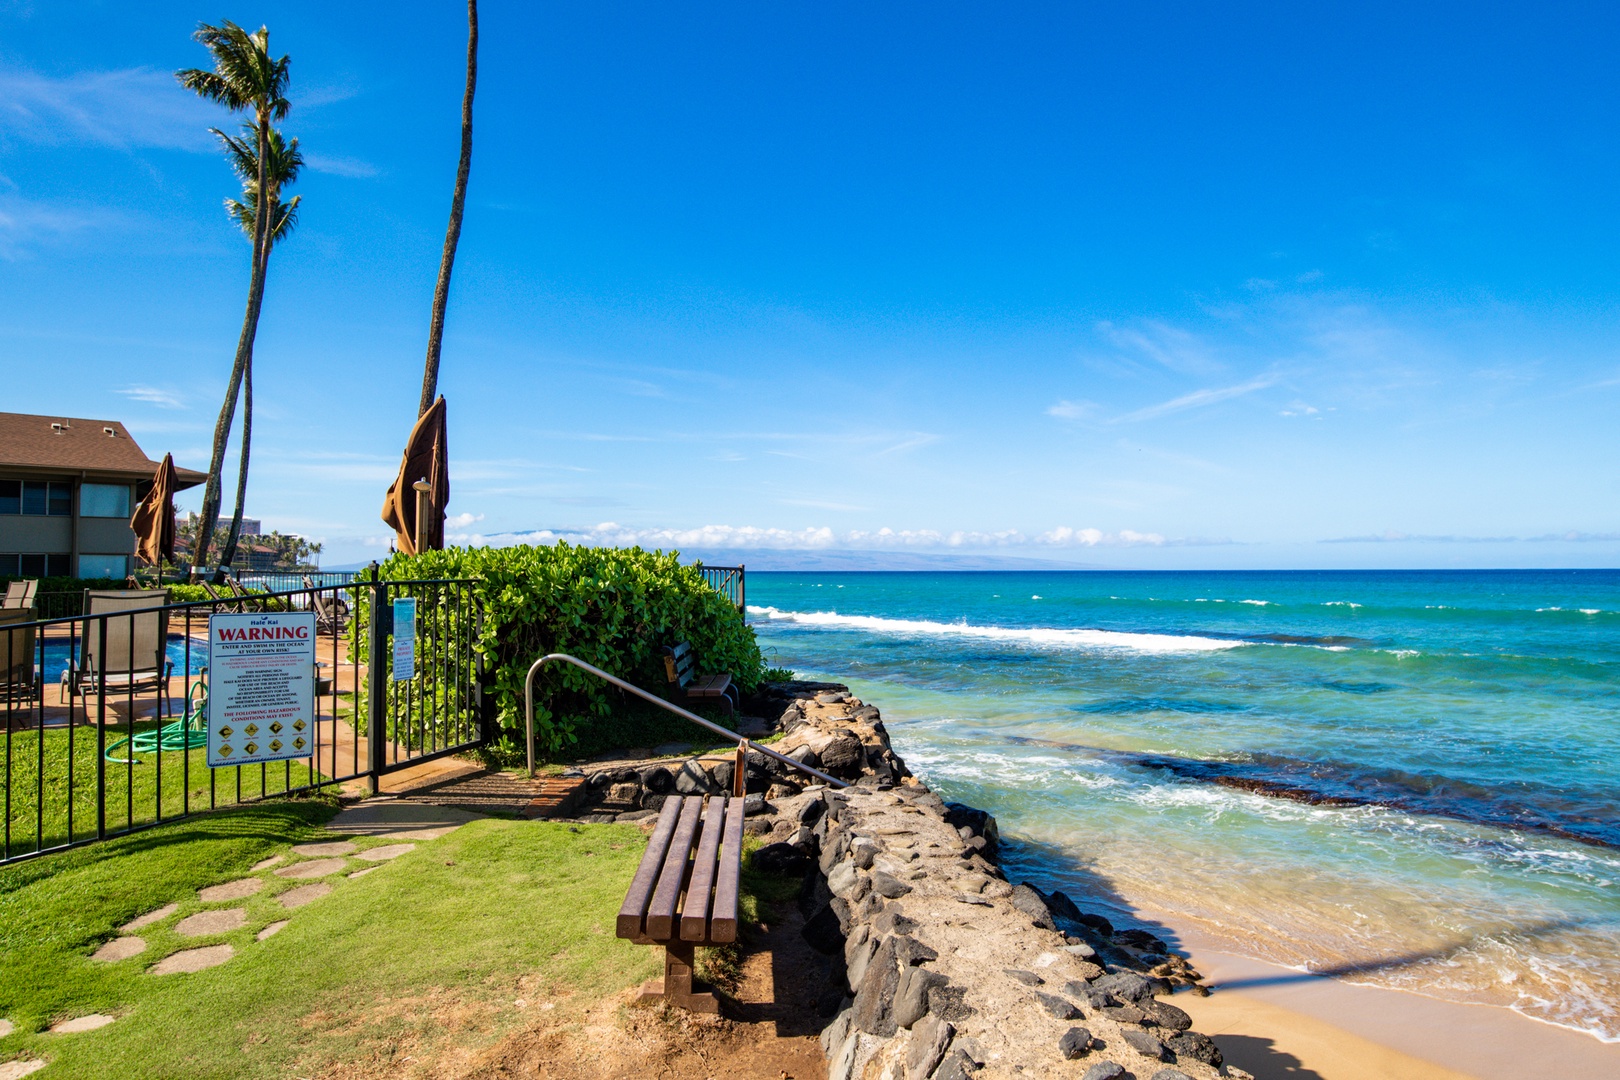 Lahaina Vacation Rentals, Hale Kai 109 - Stairs to access the beach fronting the resort